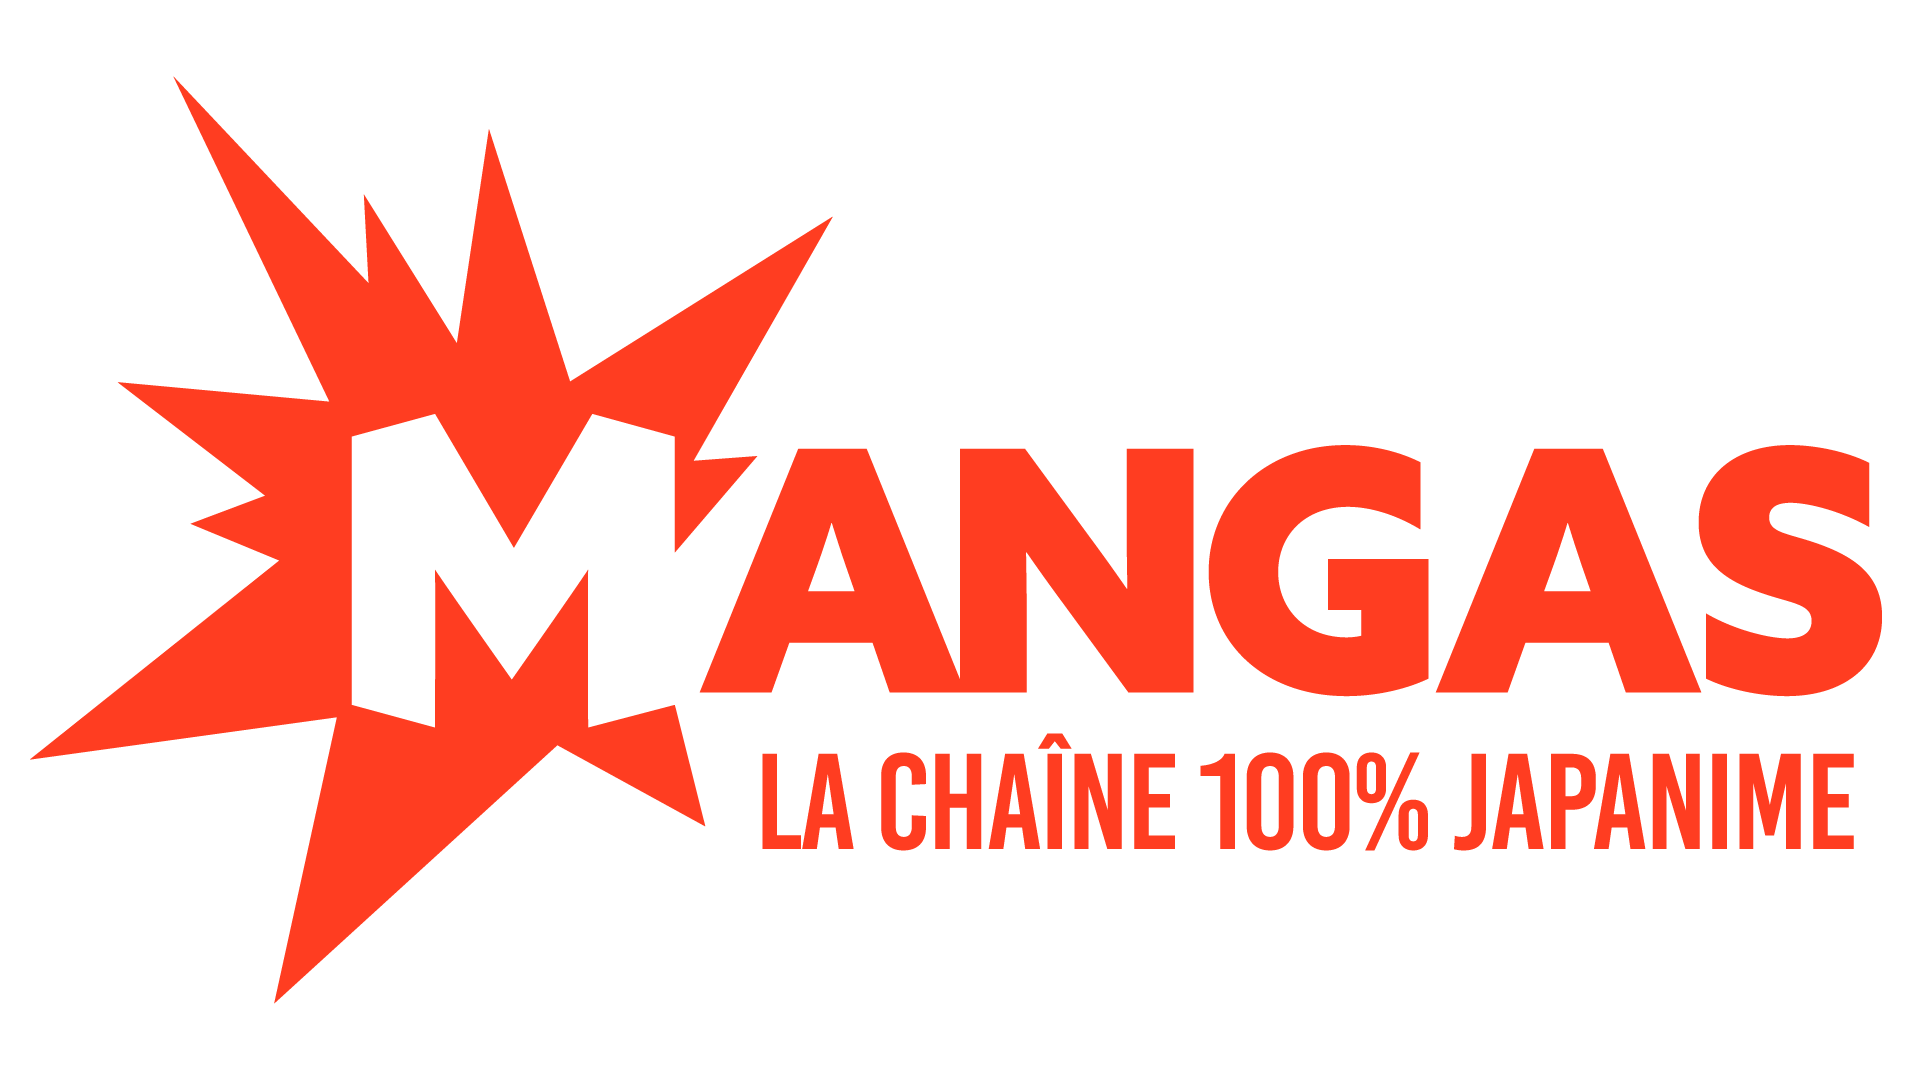 Mangas is the only channel 100% dedicated to manga characters. A must for fans of Japanese cartoons and cult series.